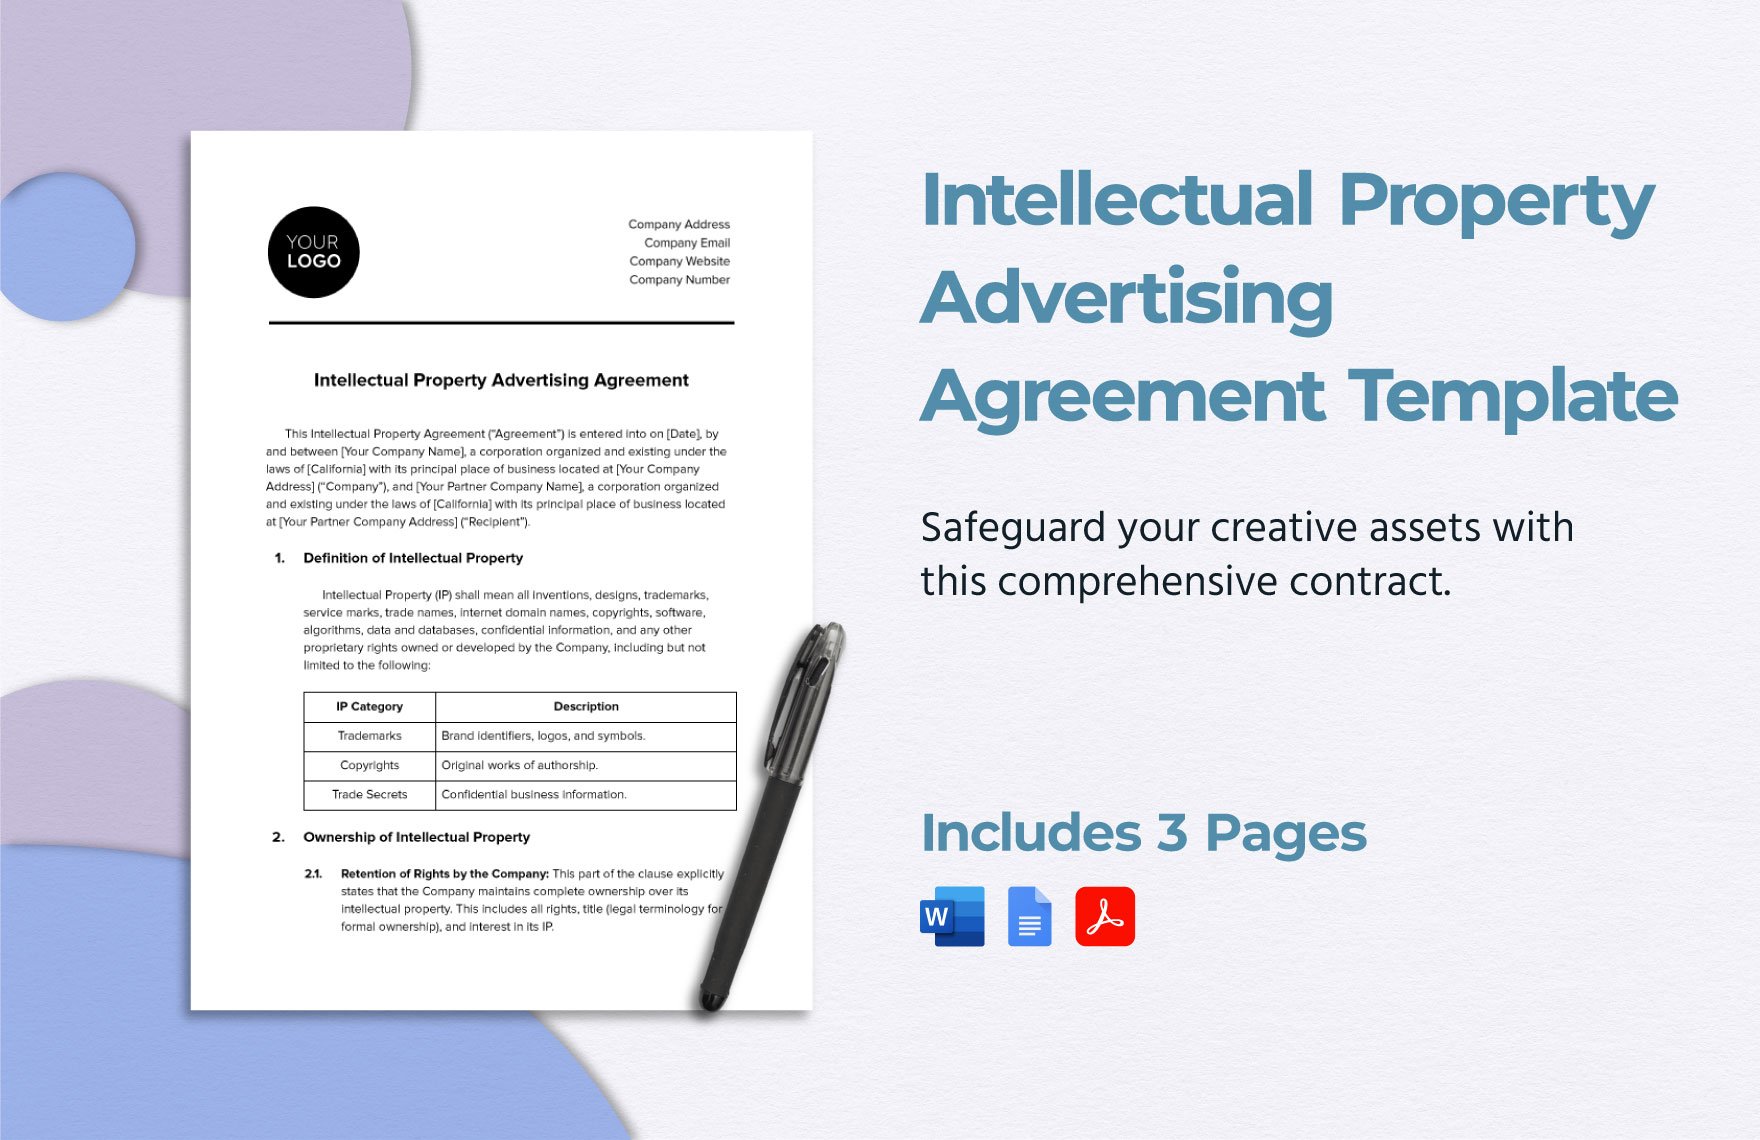 Intellectual Property Advertising Agreement Template in Word, Google Docs, PDF